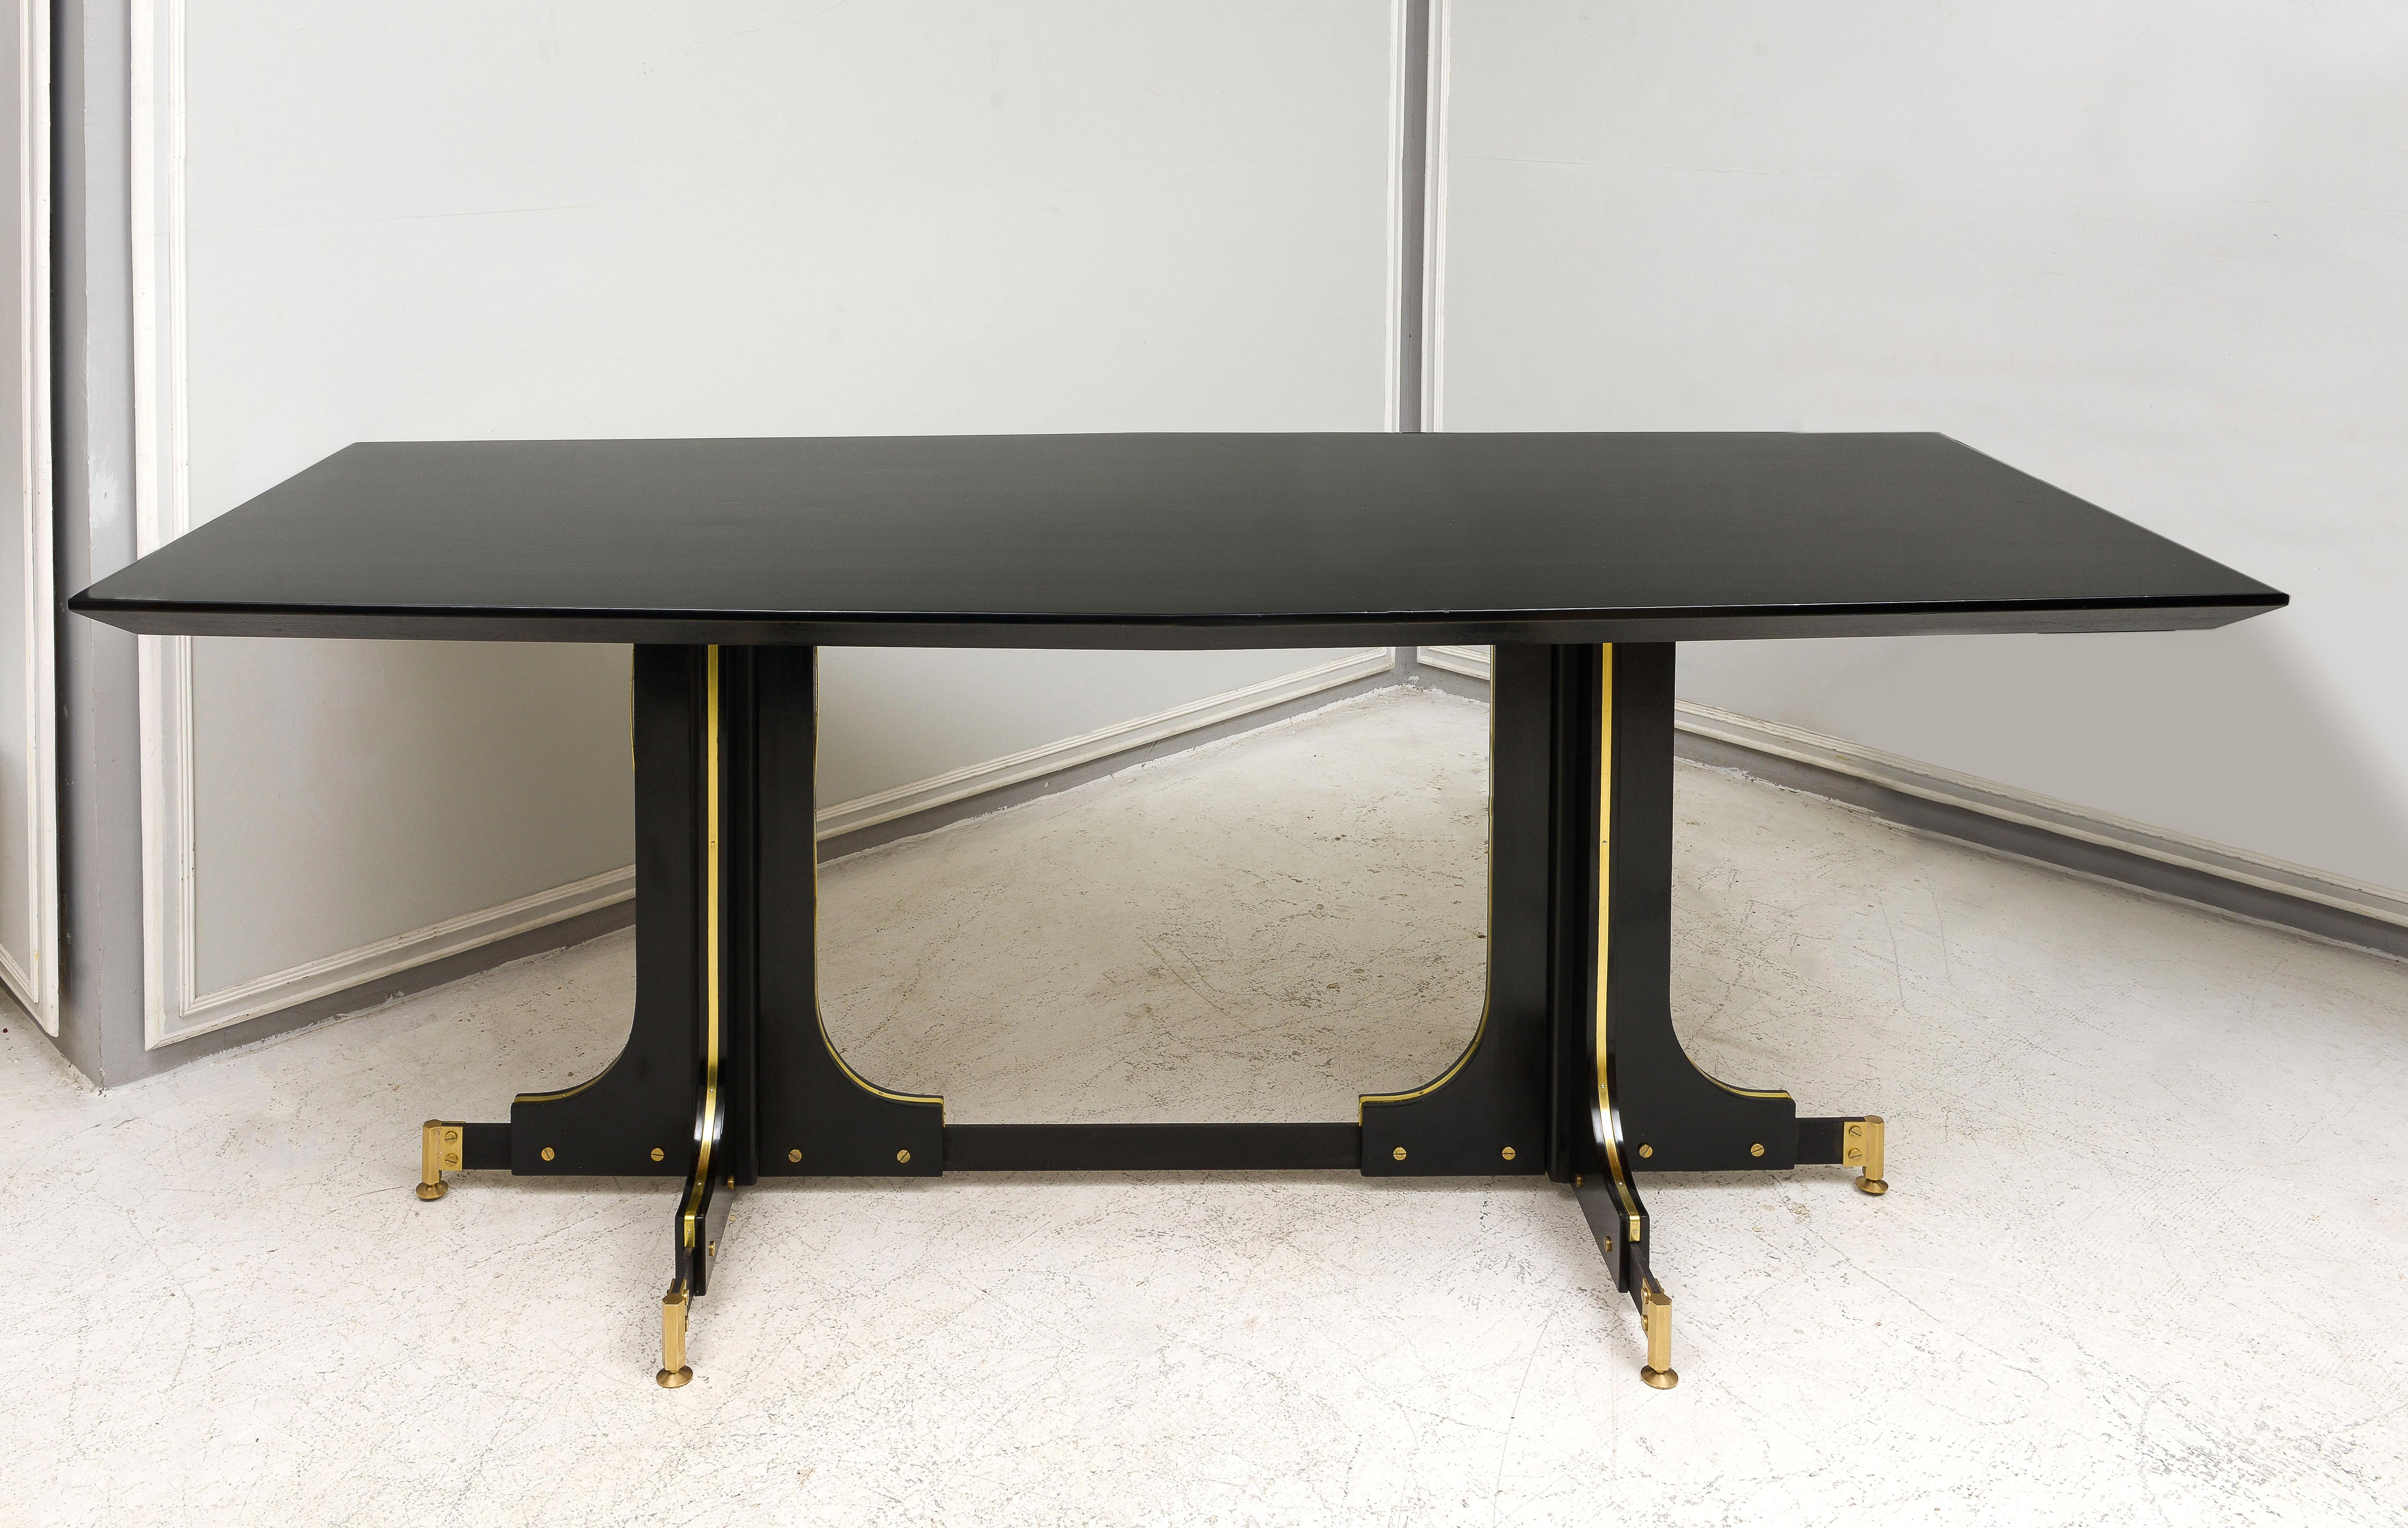 Vintage Italian ebonized table with bronze details.
Measures: The depth in center of table is 35.5